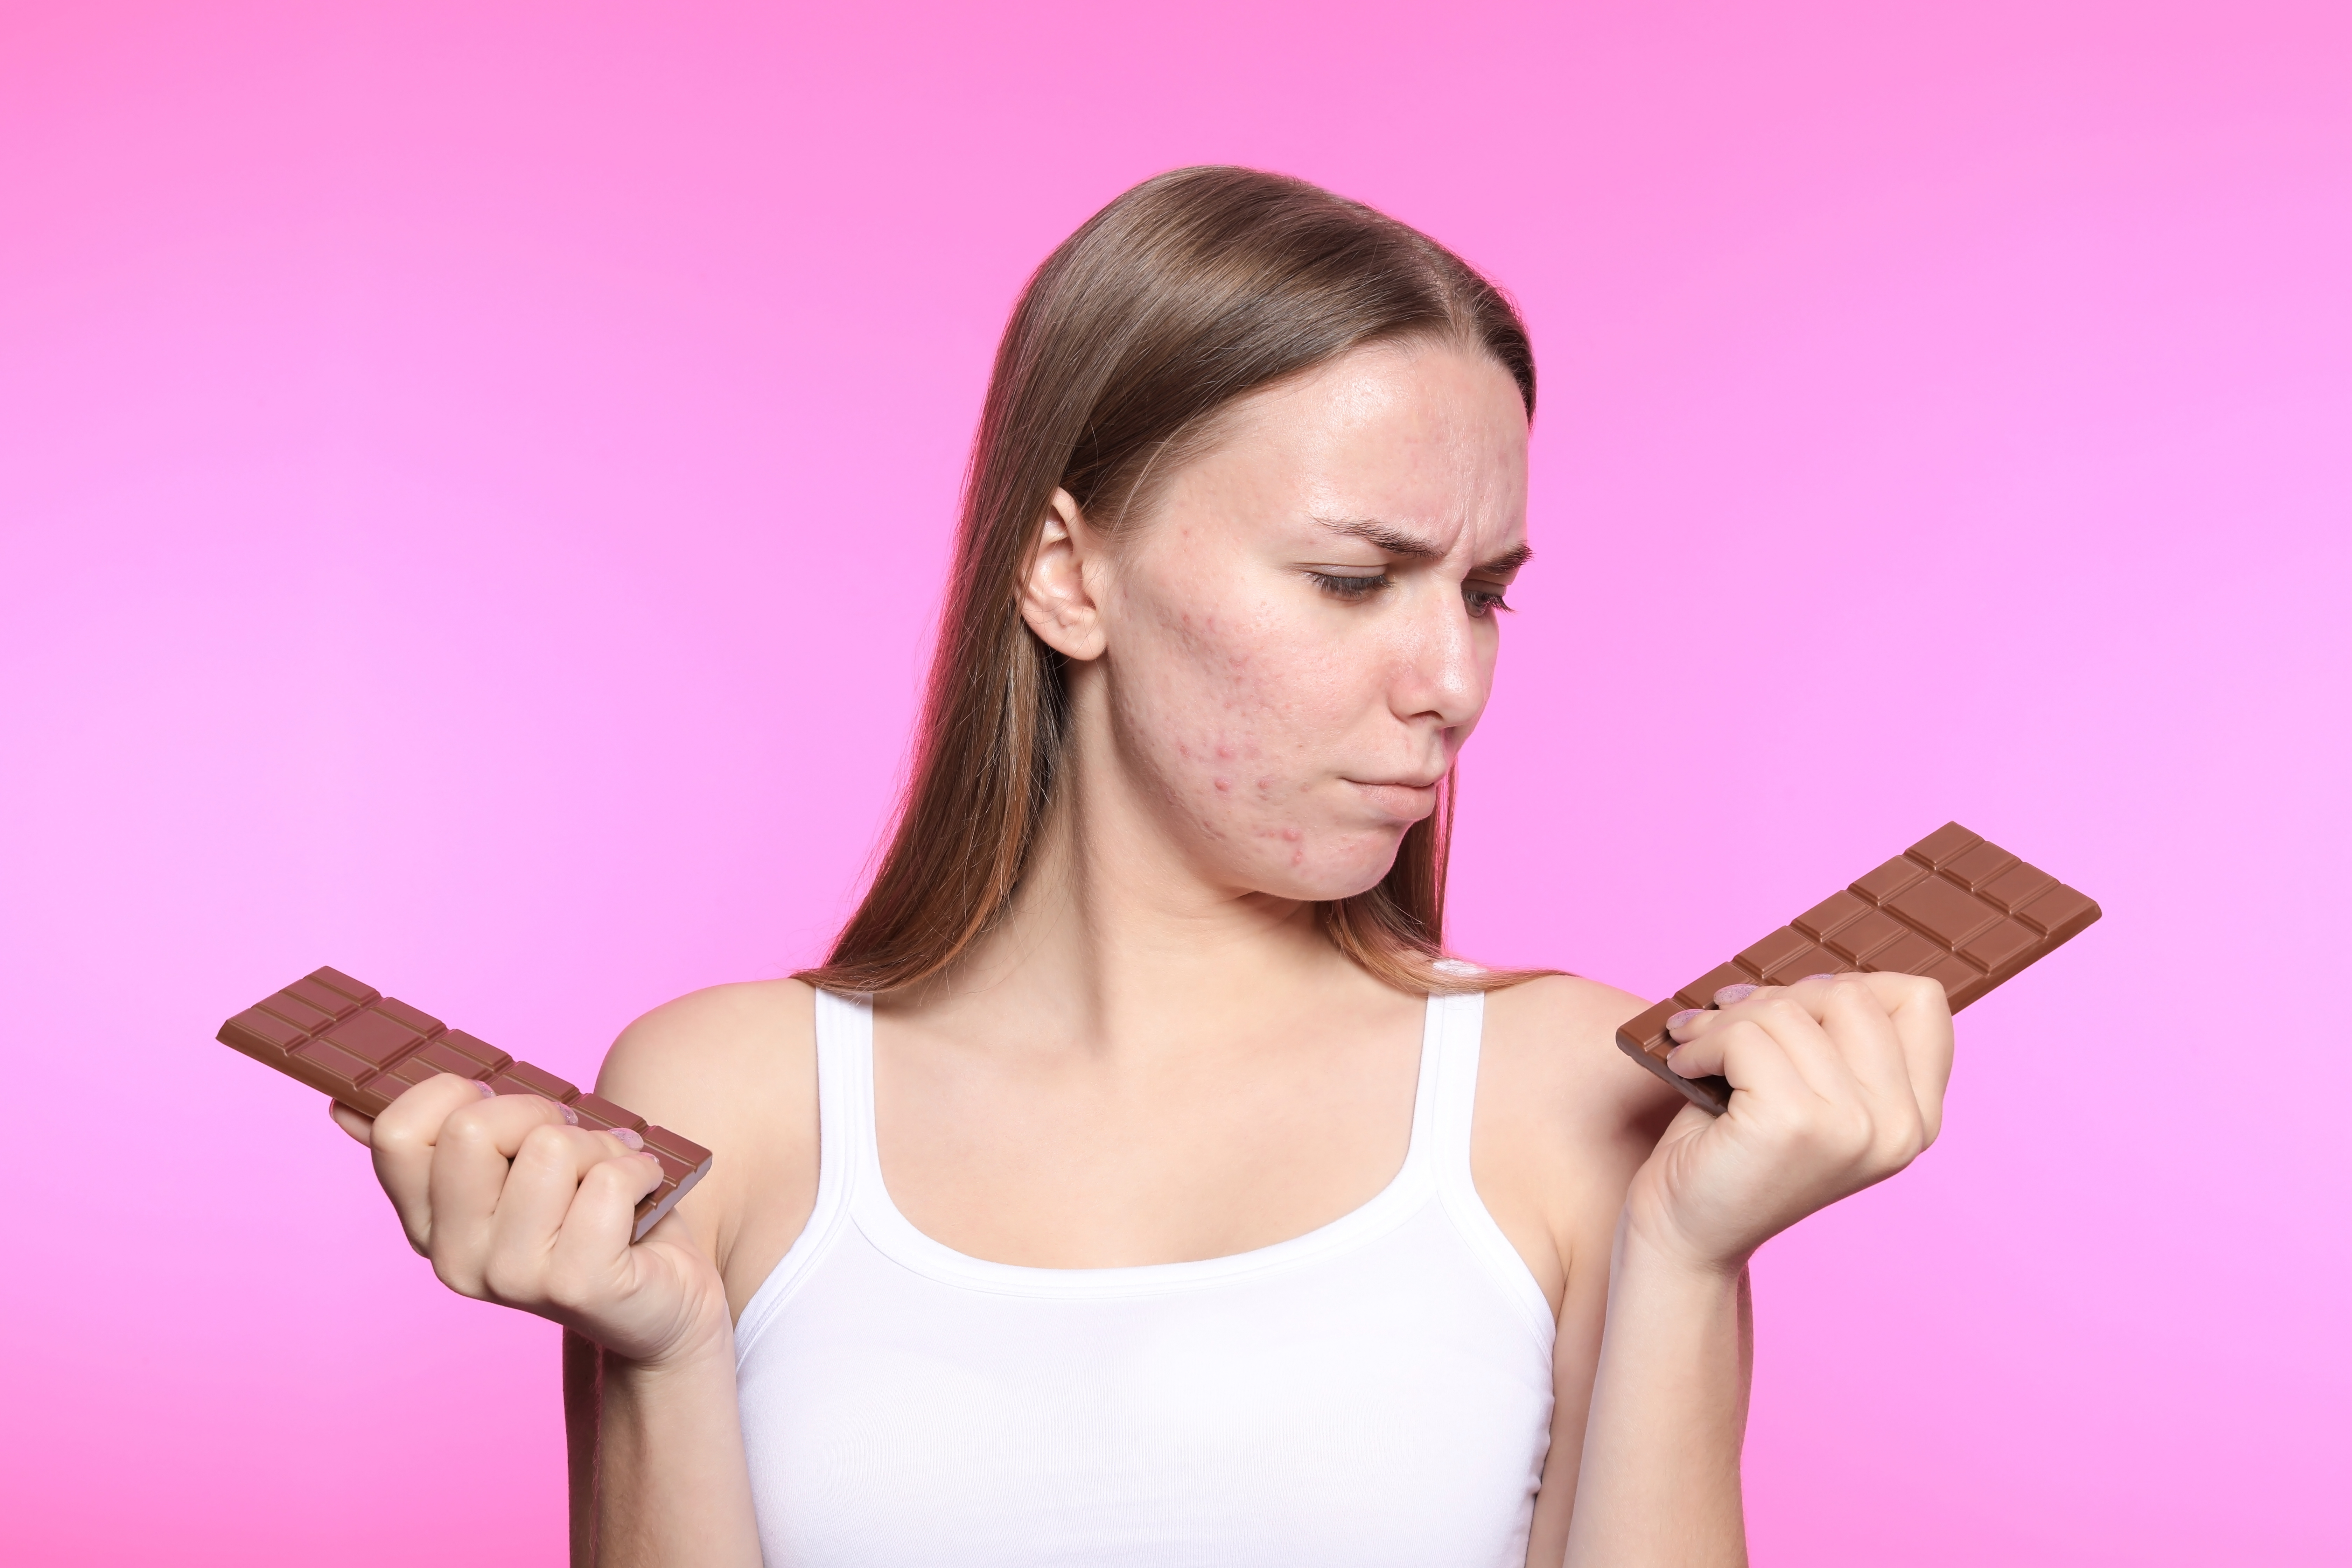 Young woman with acne problem holding chocolate bars on color background. Skin allergy